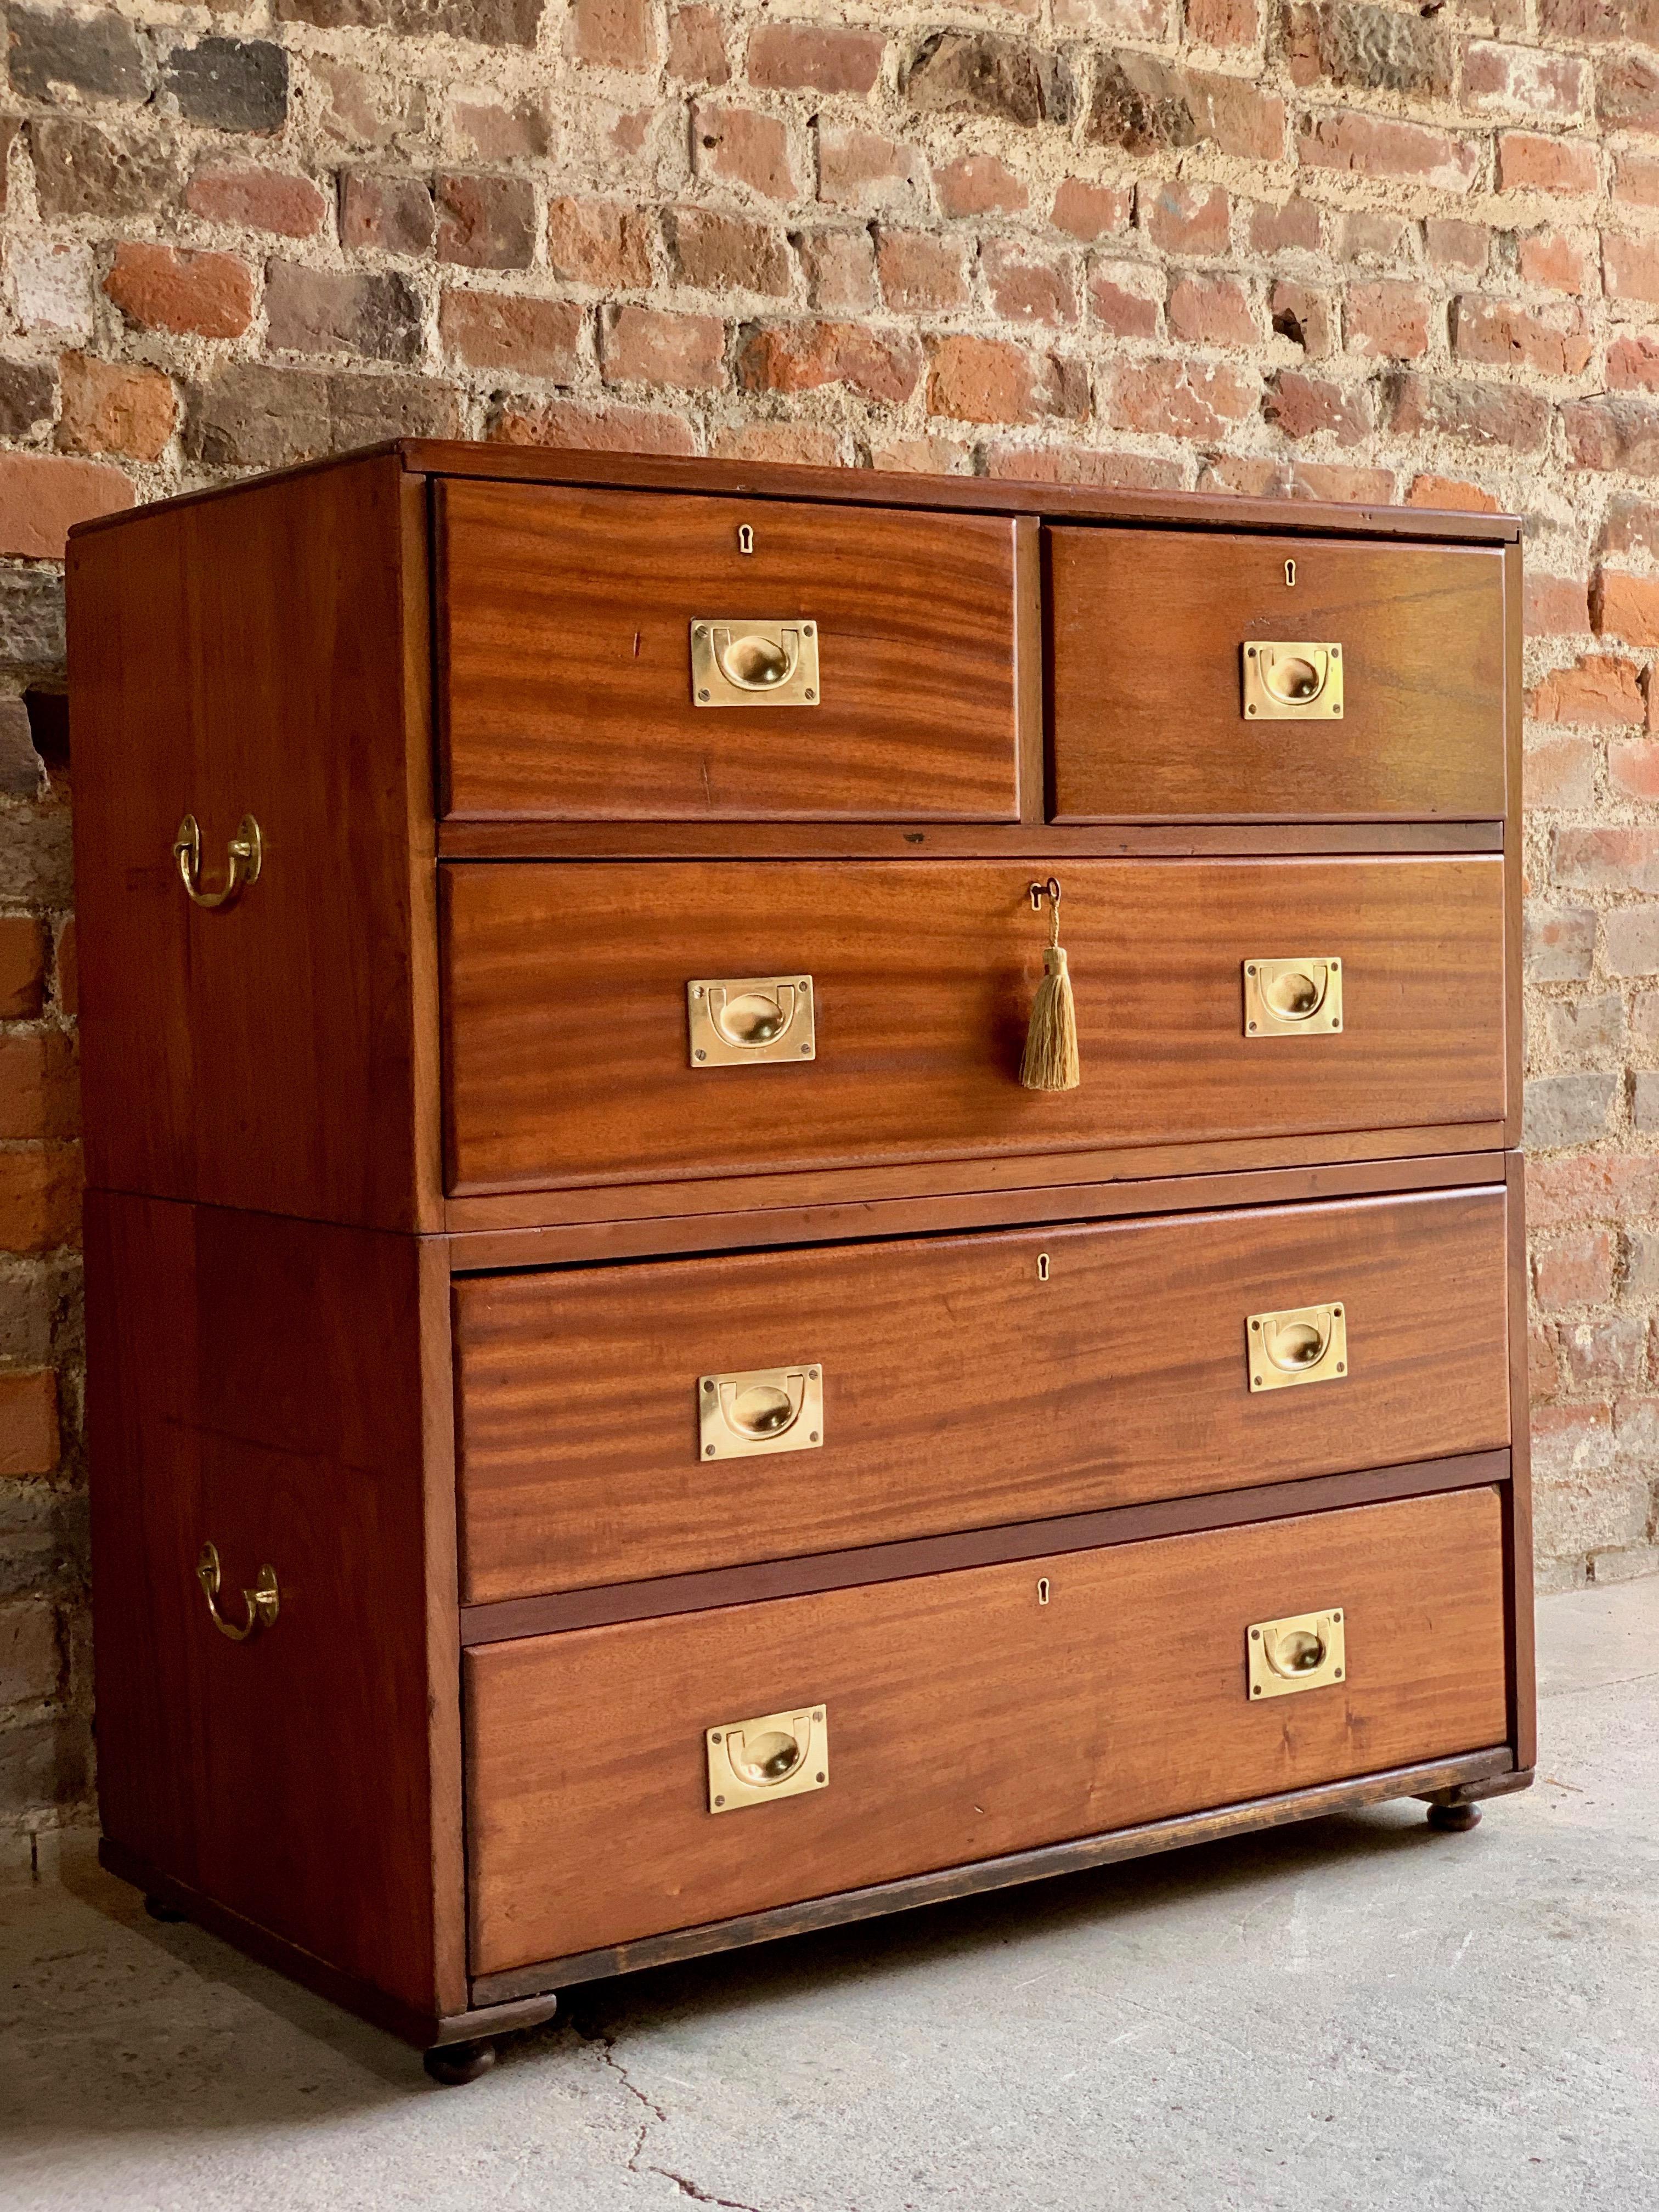 Brass 19th Century Military Campaign Chest of Drawers in Teak circa 1870 No 23